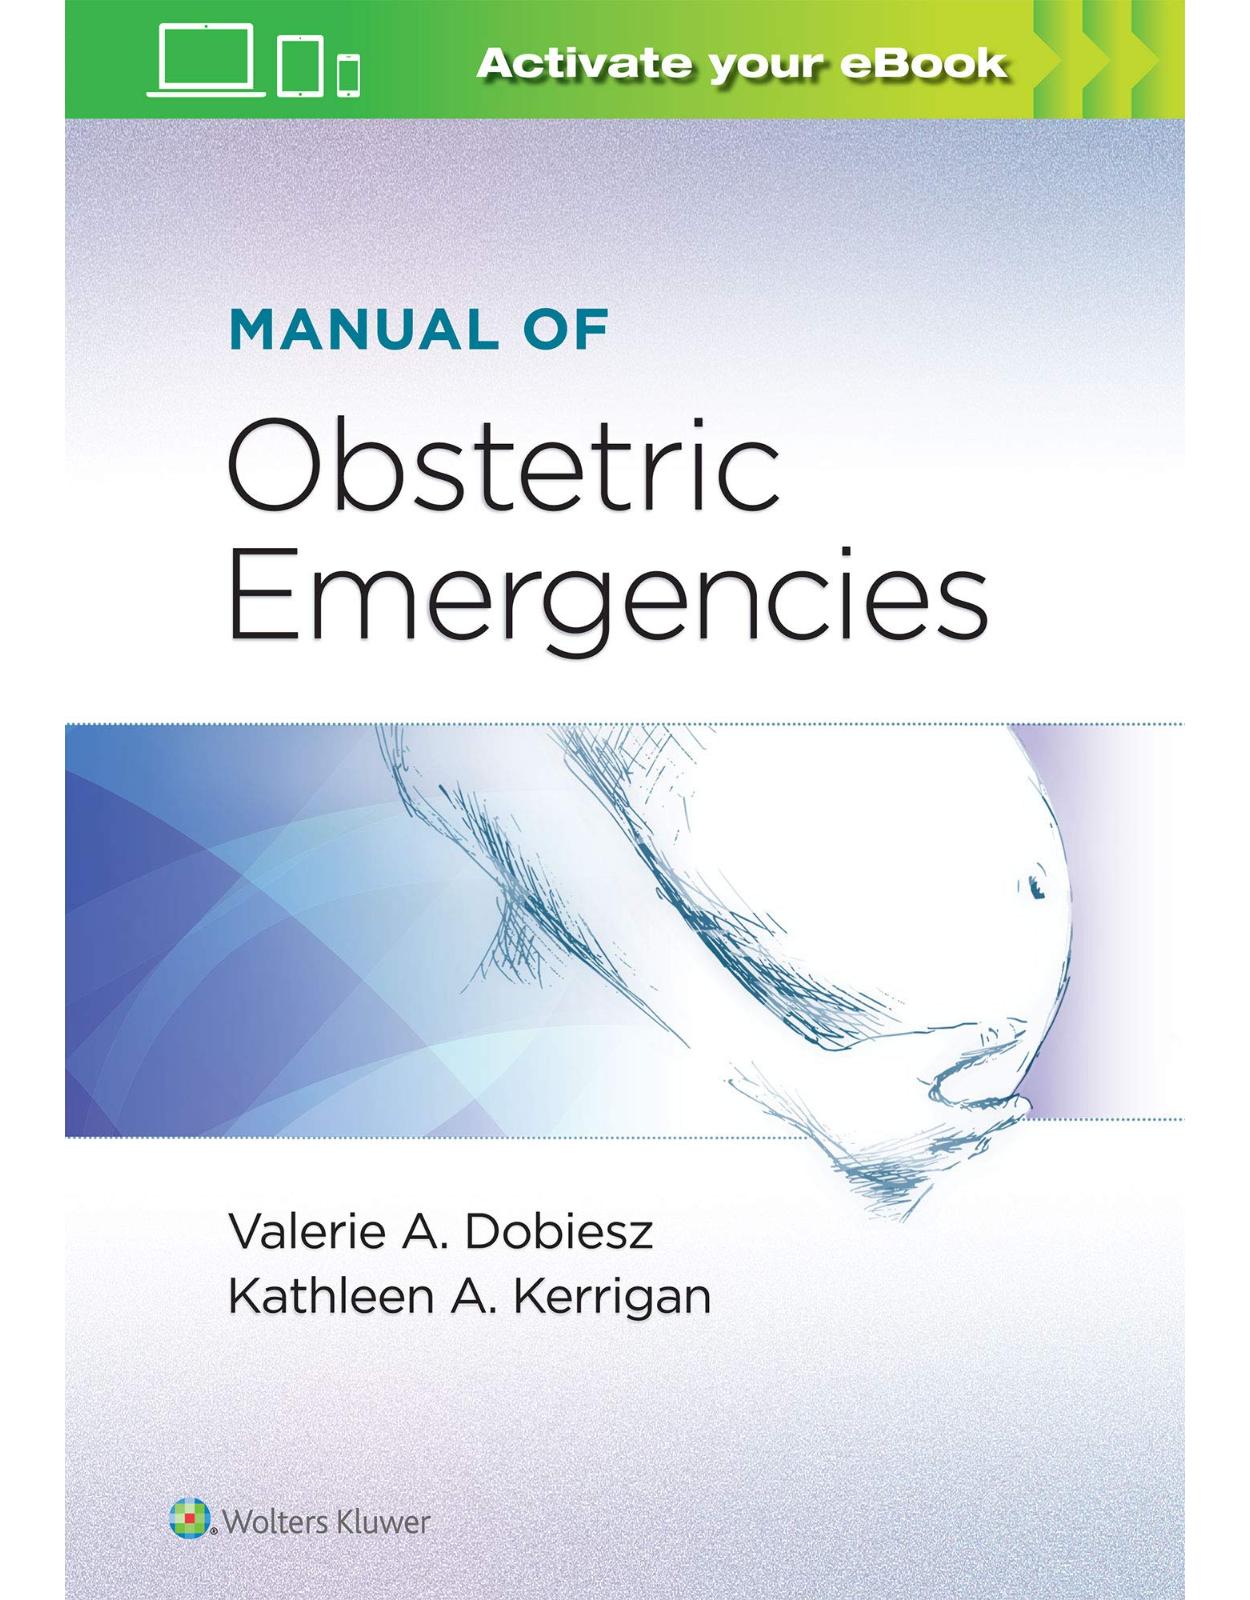 Manual of Obstetric Emergencies 